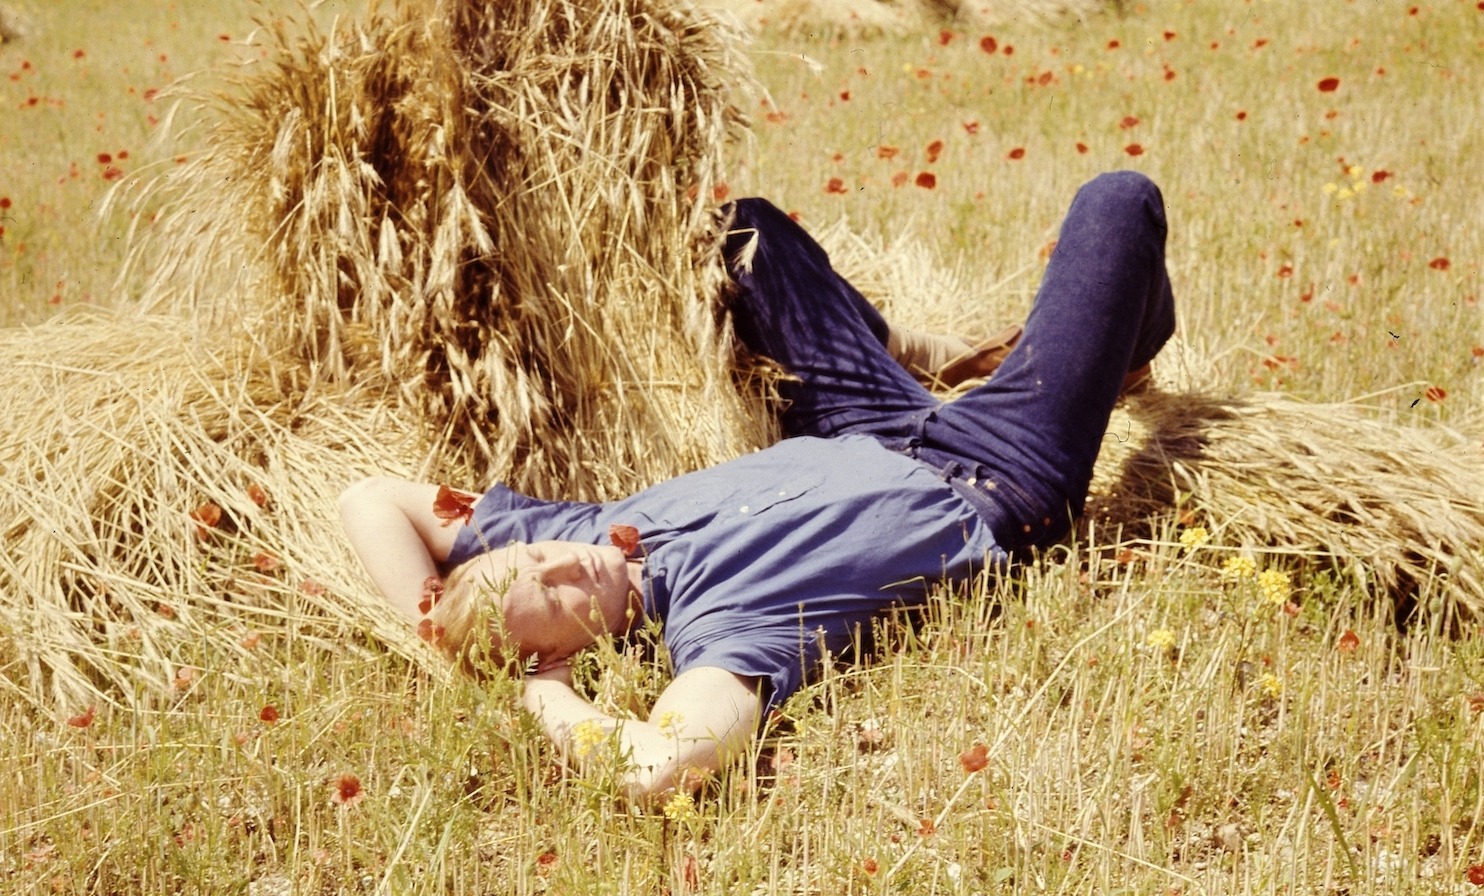 Portrait of American Olympic fencer Kin Hoitsma laying down in a field. *** Local Caption *** Kin Hoitsma;